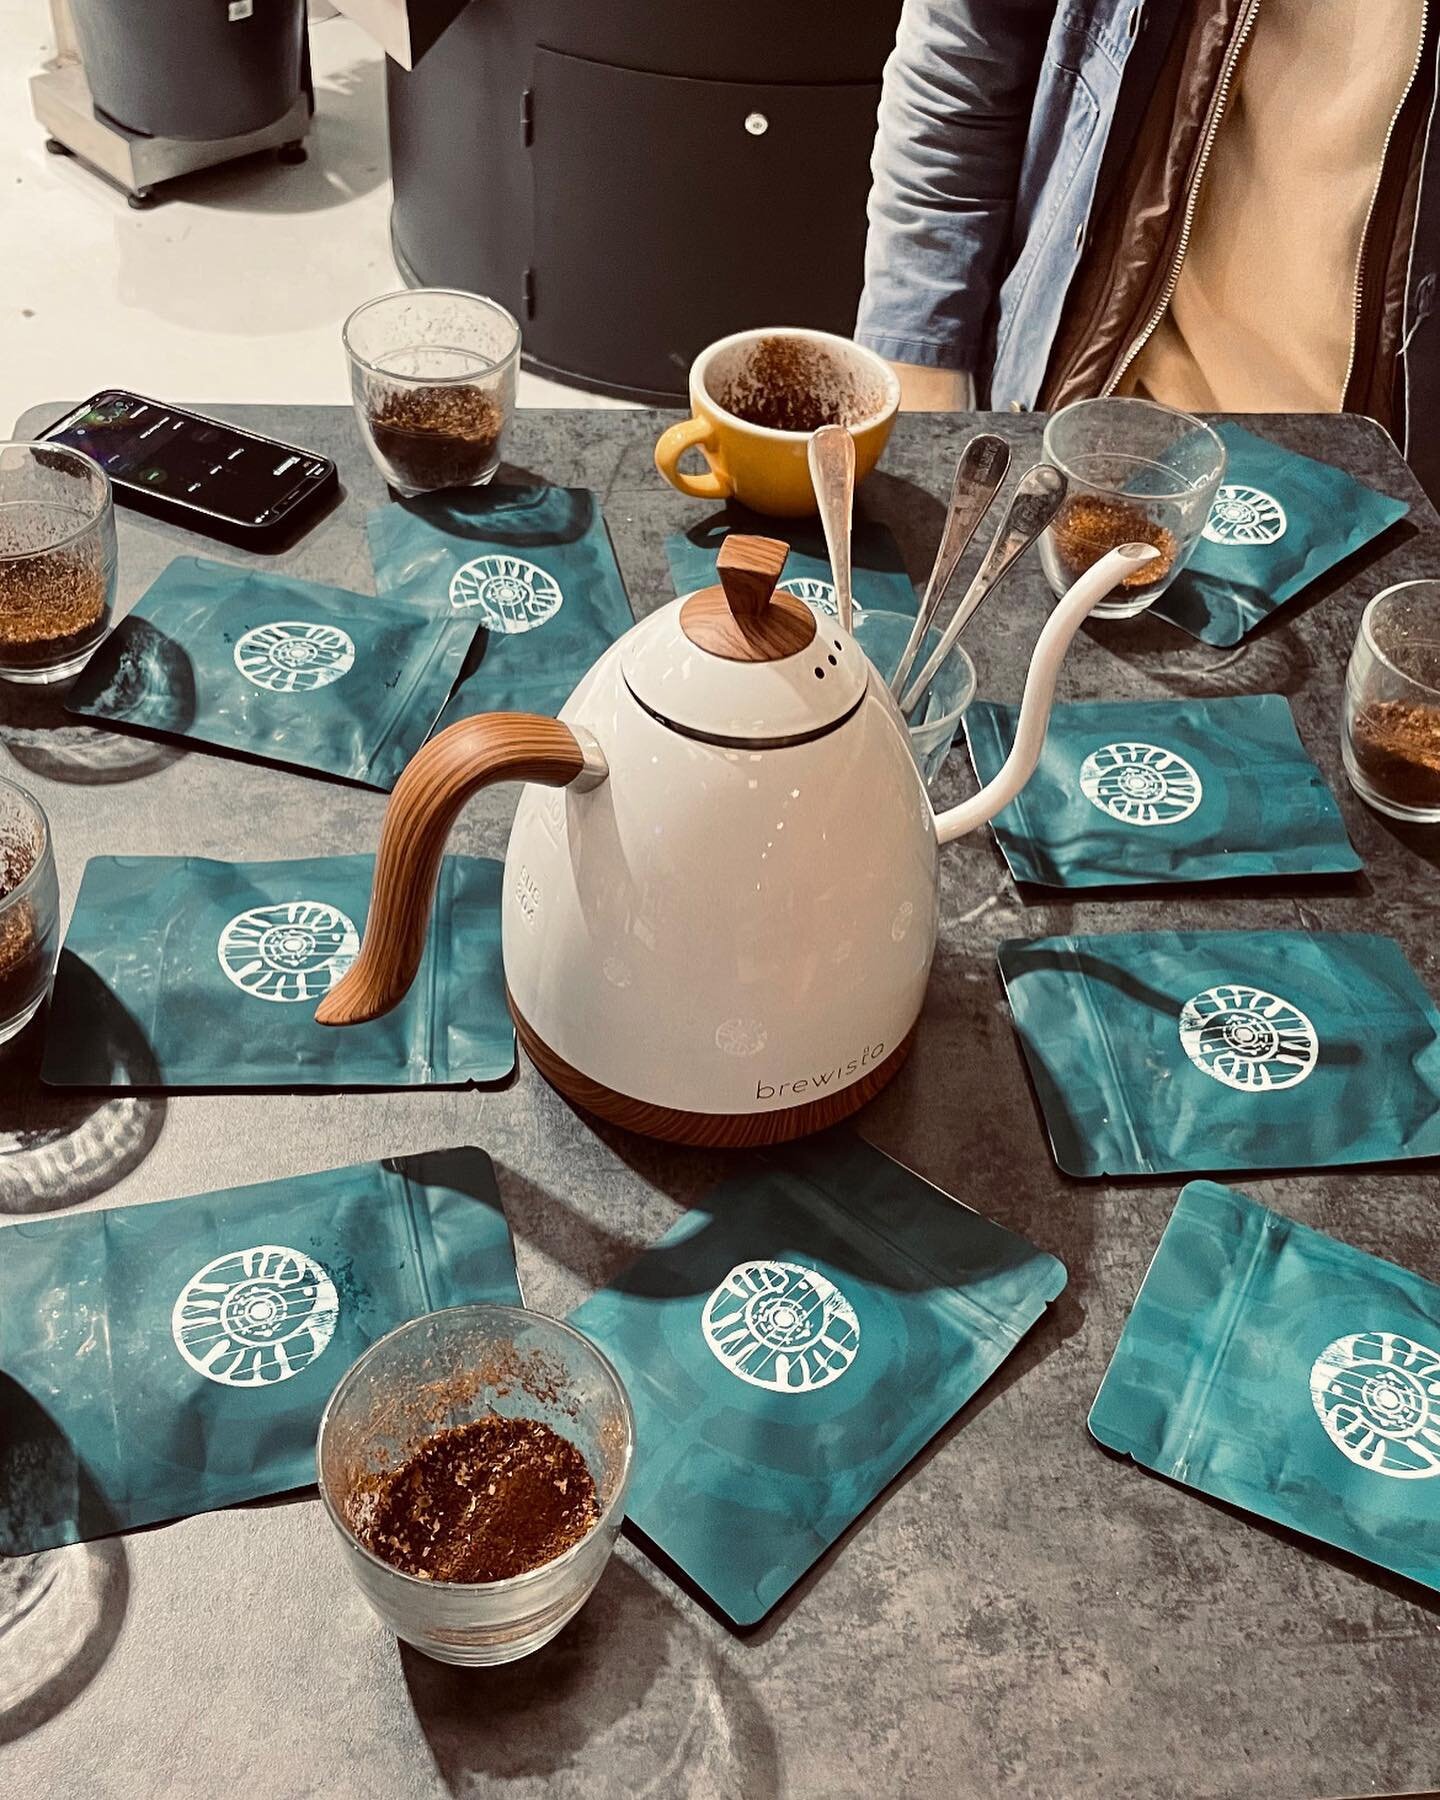 Always a pleasure to work with the guys at @falconspecialty and @pharmacie_coffee_roasters, our recent cupping session ☕️

#specialitycoffee #coffee #coffeeroaster #coffeetime #cupping #sampling